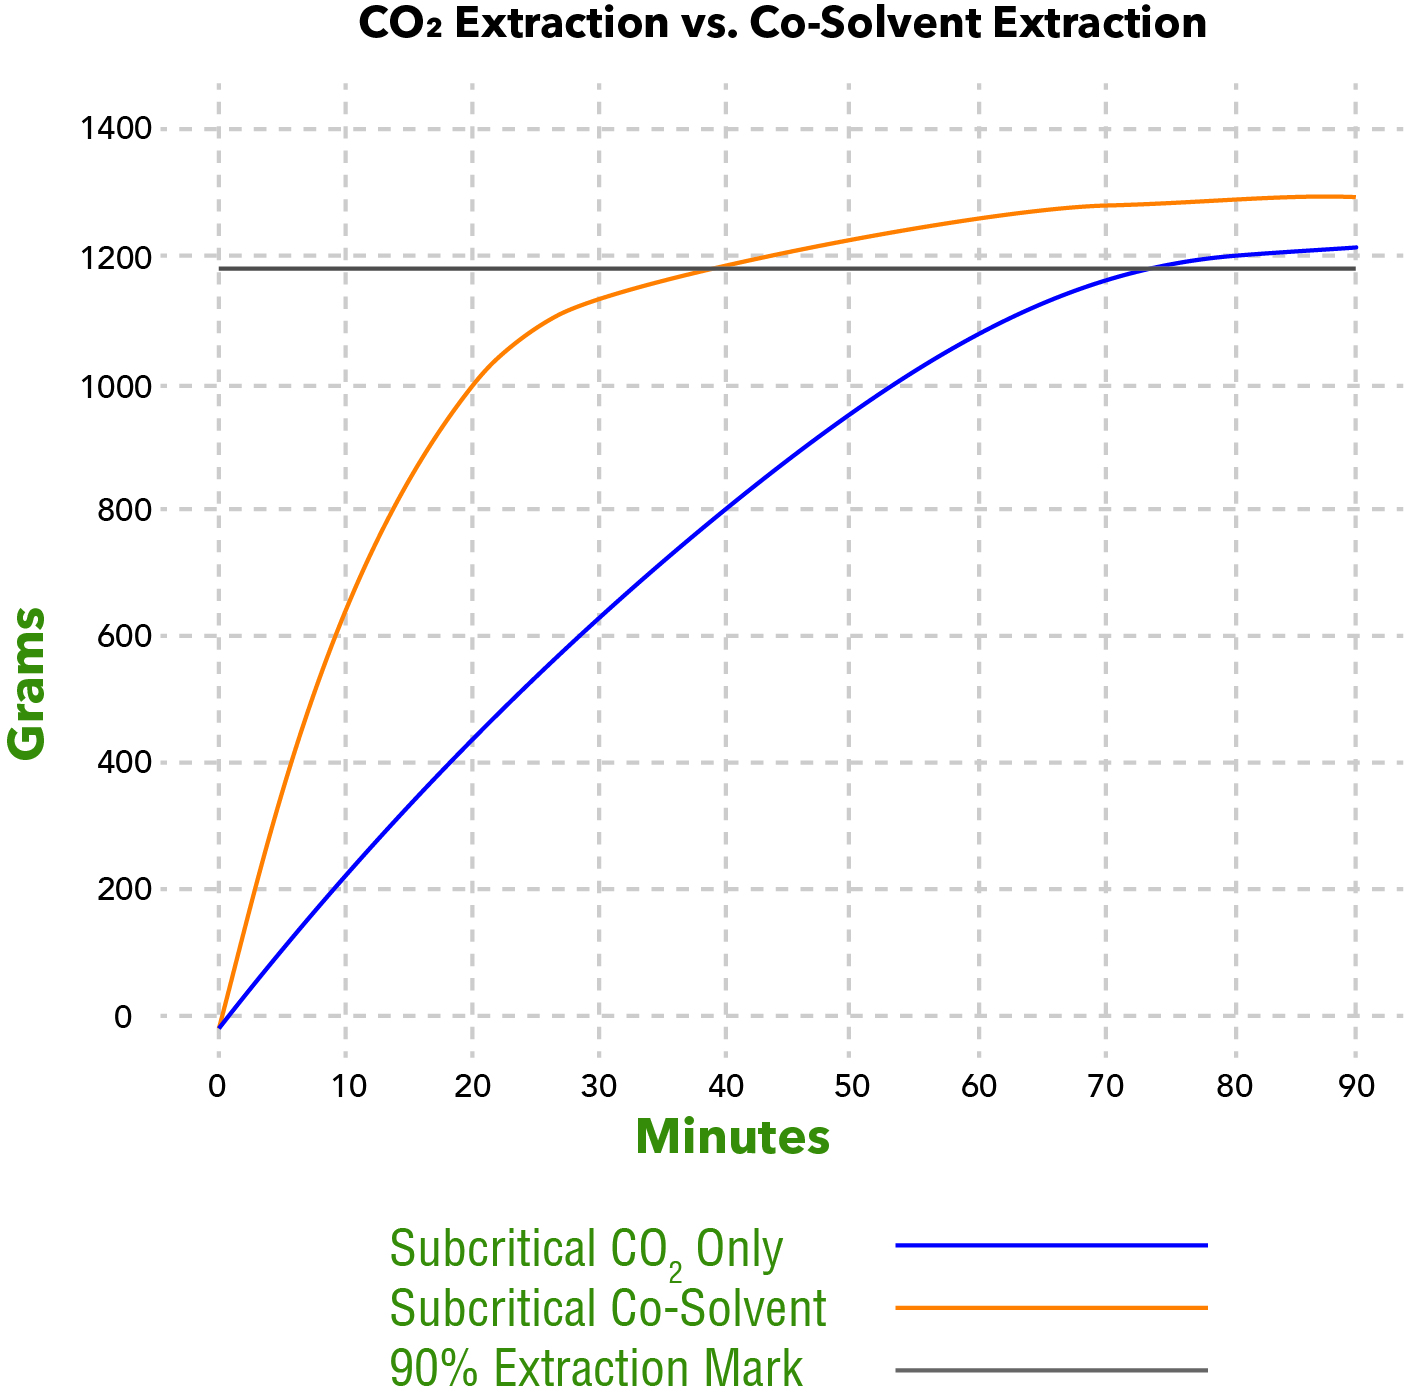 https://campaign-image.com/zohocampaigns/122231000015508034_zc_v88_co2_only_vs_co_solvent.jpg